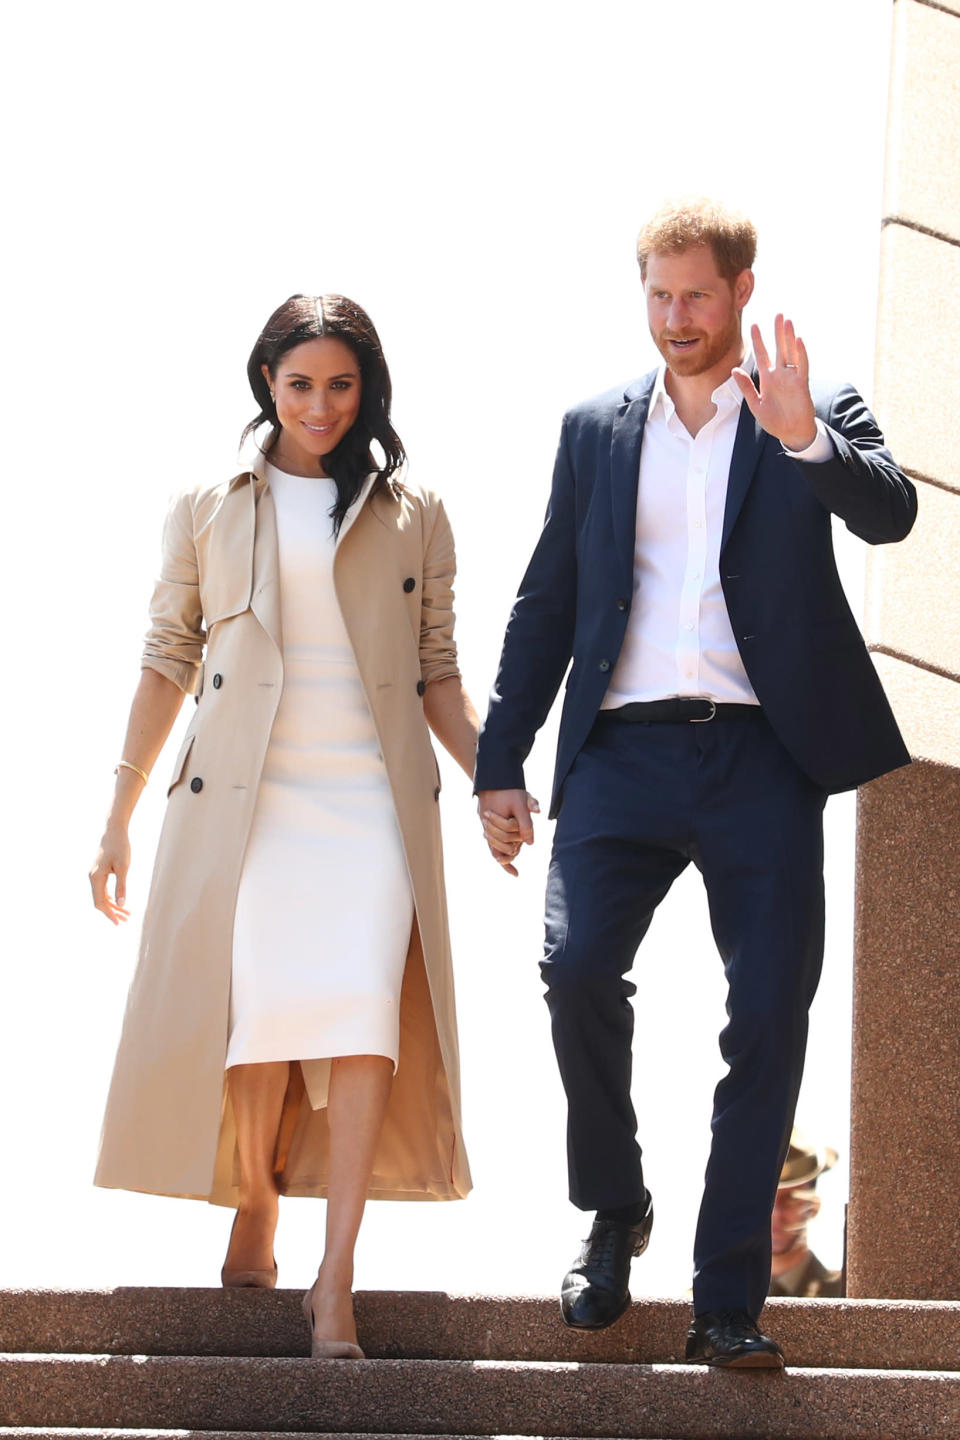 The couple held hands as they came down the stairs of the Sydney Opera House. Source: Getty